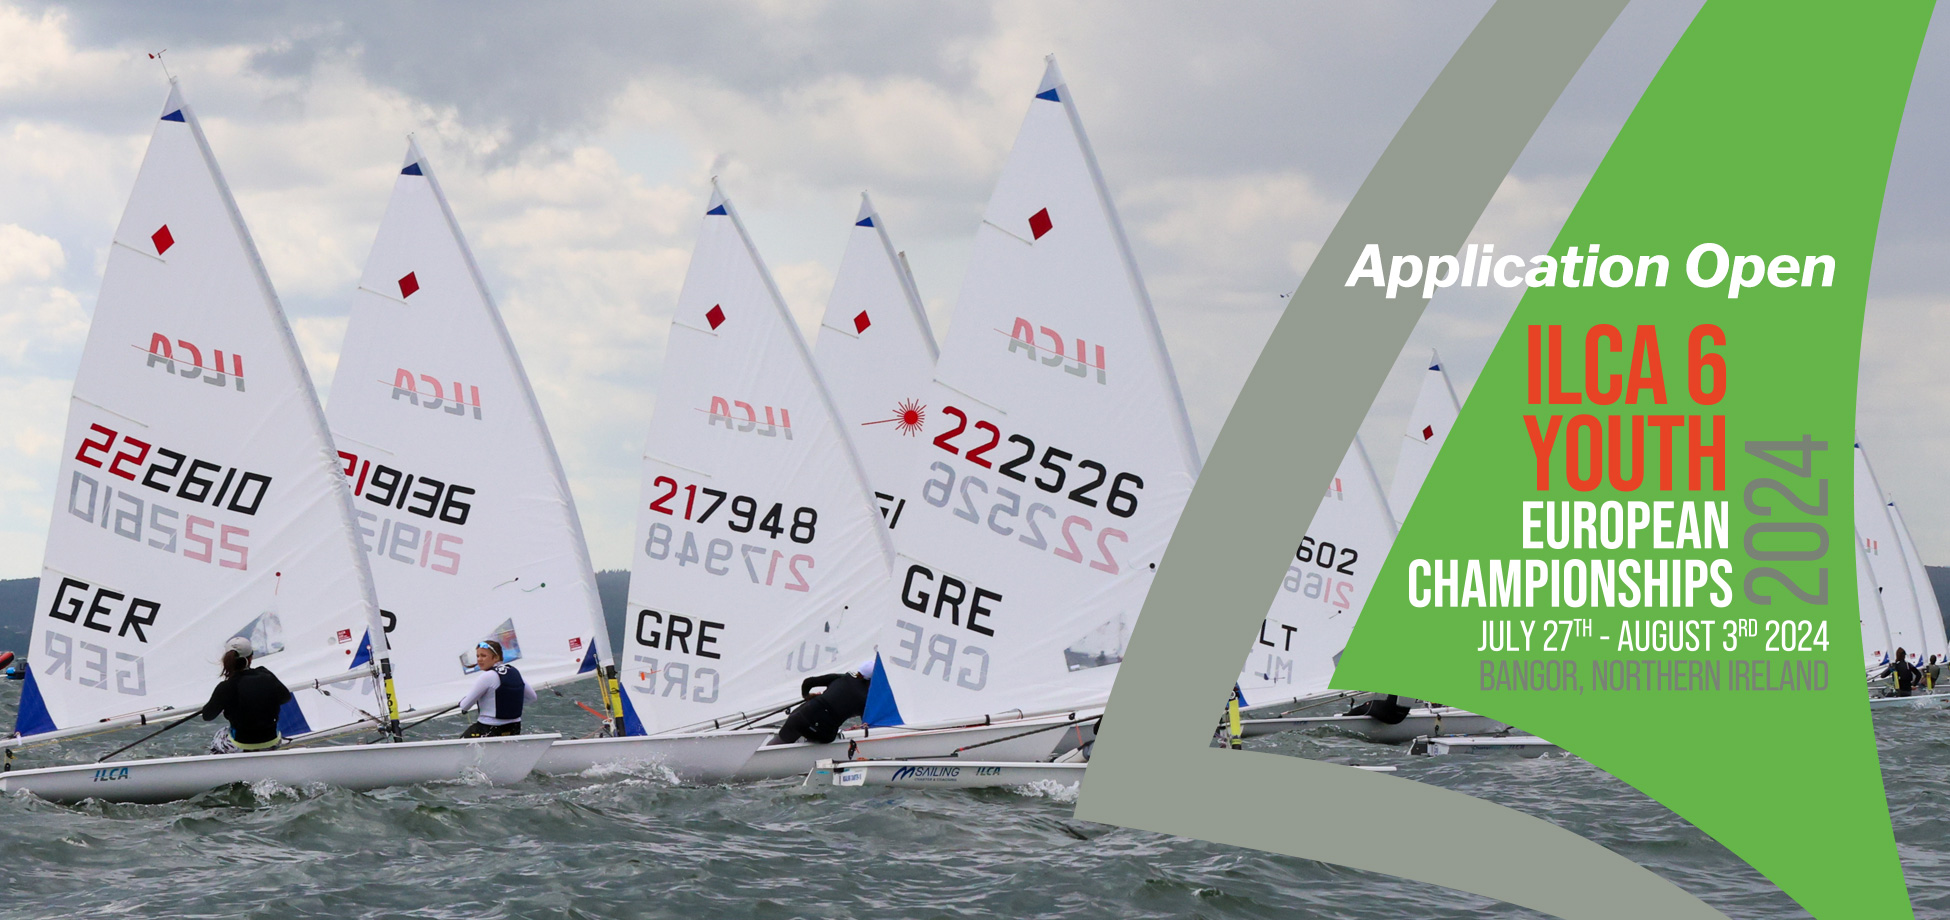 application open 2024 ilca 6 youth europeans